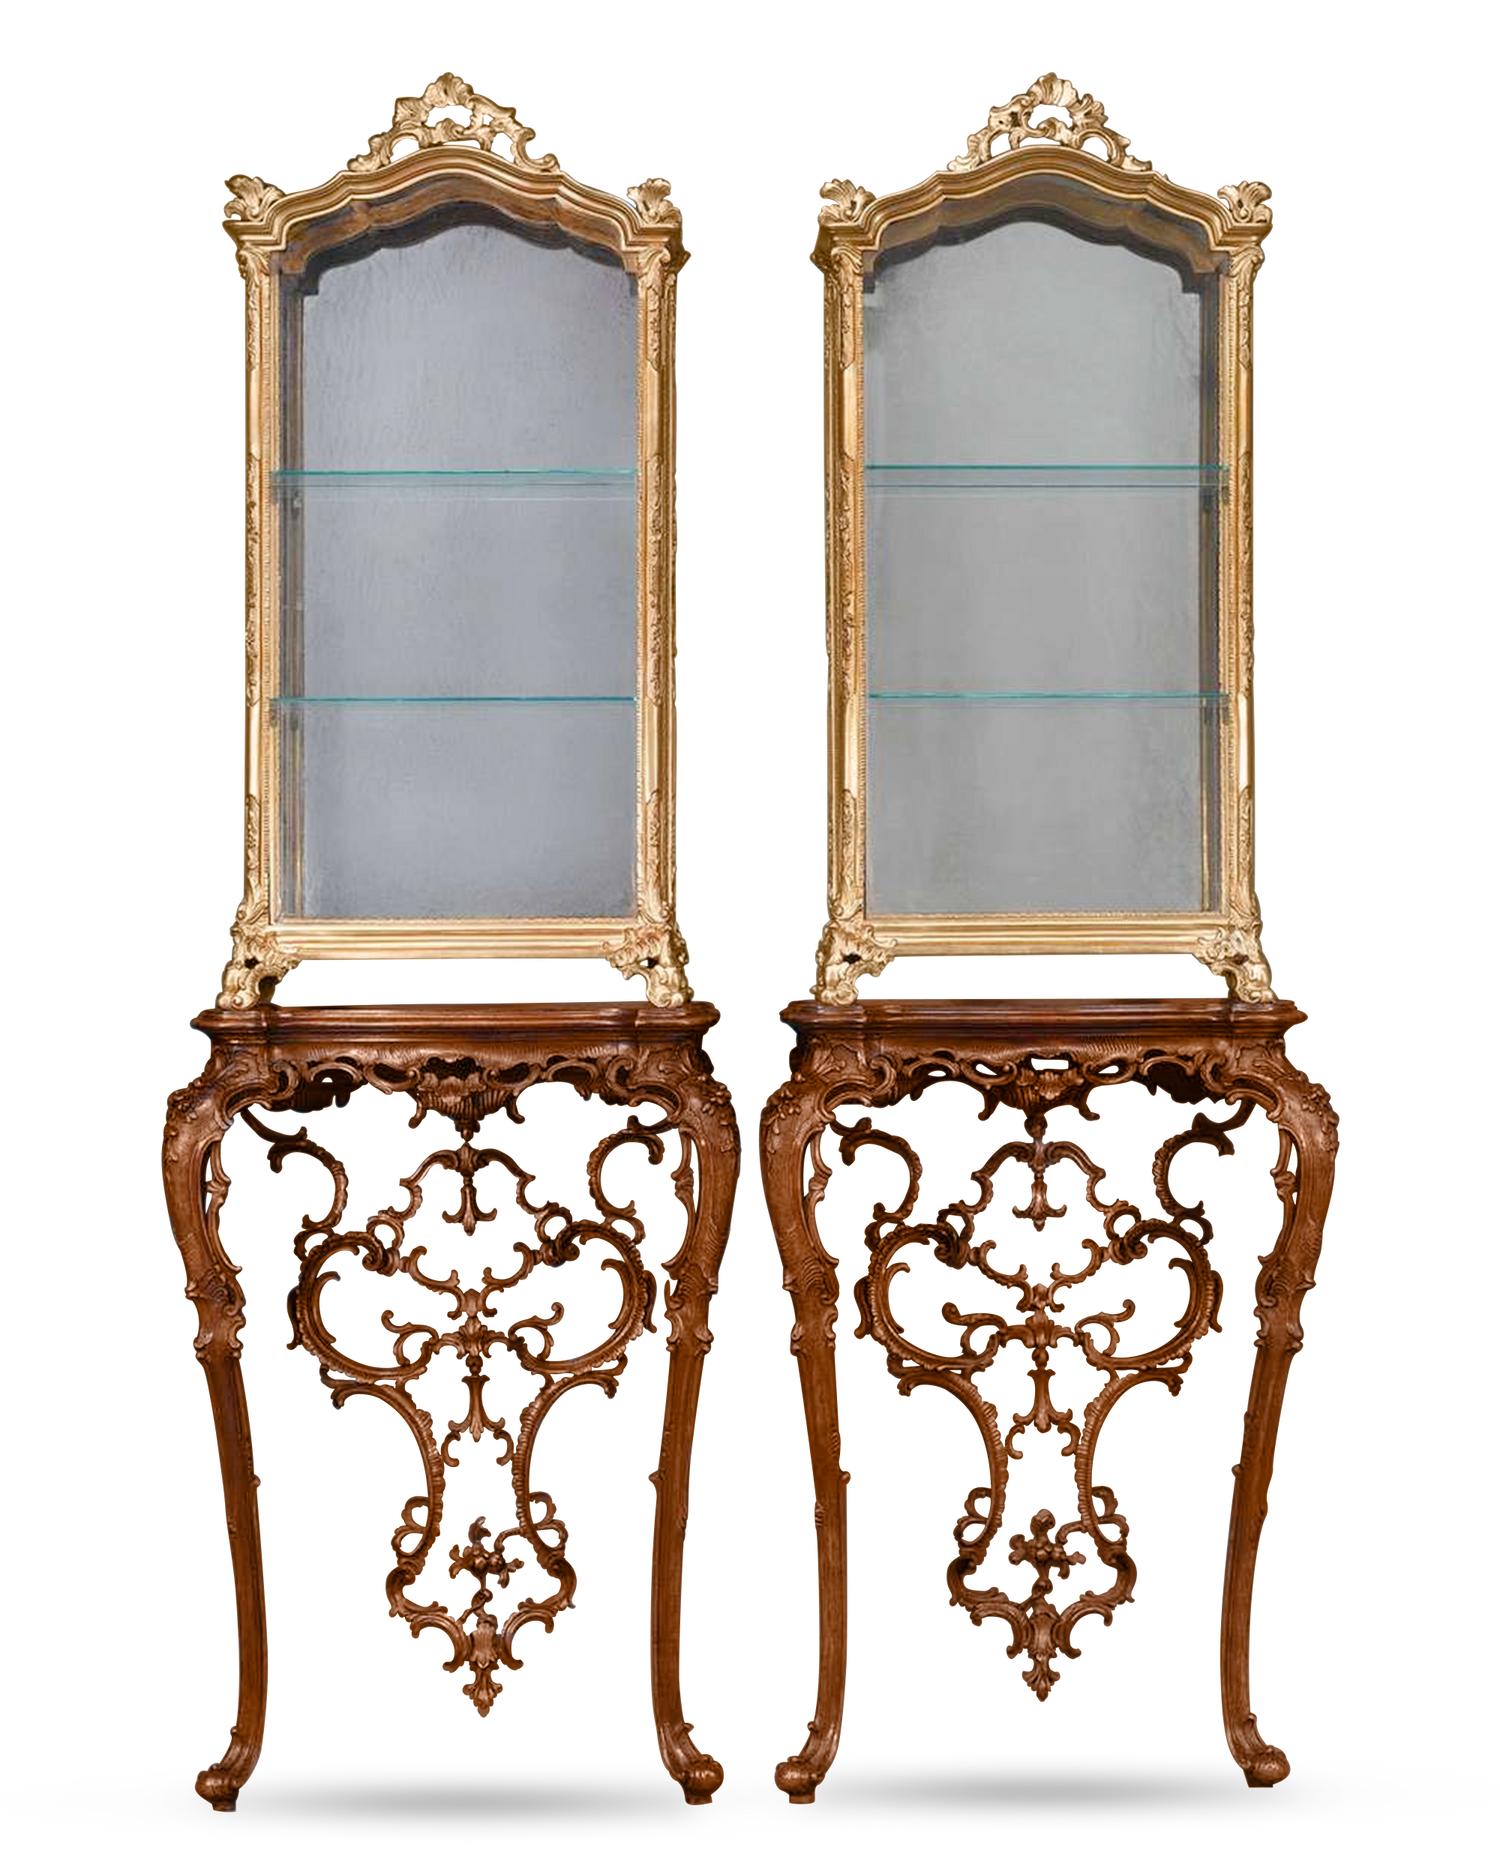 These 19th-century vitrines are elegant examples of the Rococo style